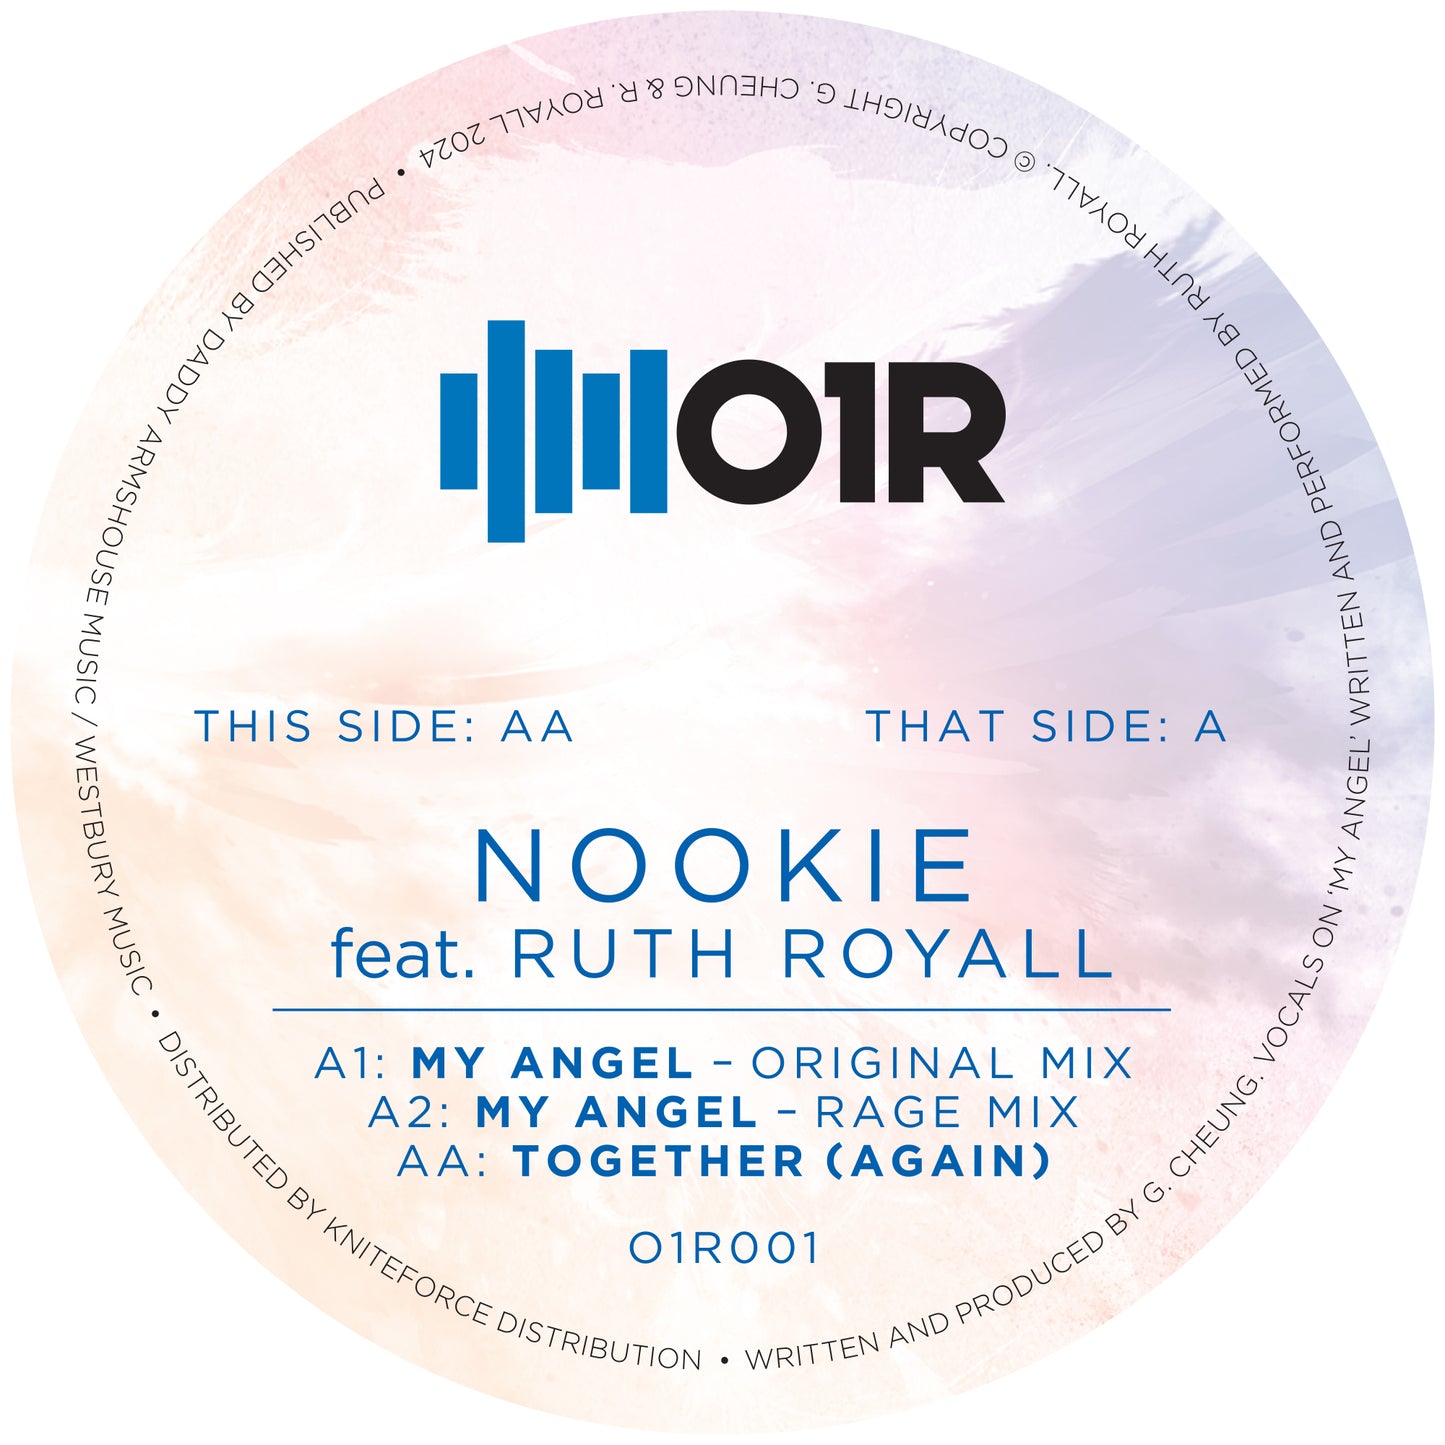 Nookie - My Angel (feat. Ruth Royall) / Together Again - O1R001